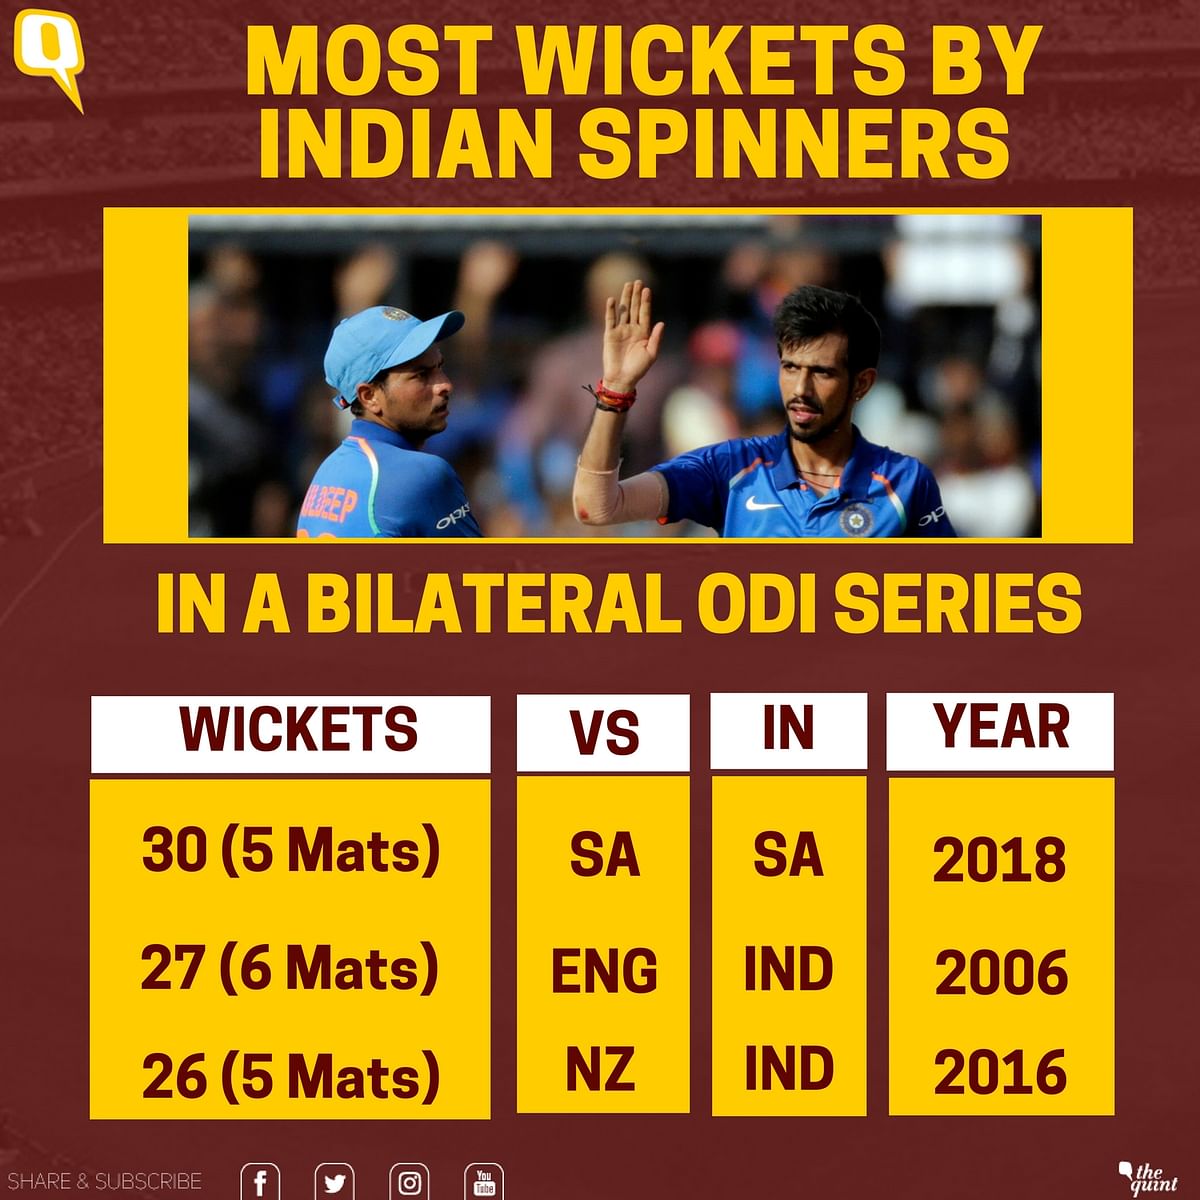 India’s maiden ODI win  at Port Elizabeth also resulted in their first bilateral ODI series win in South Africa.